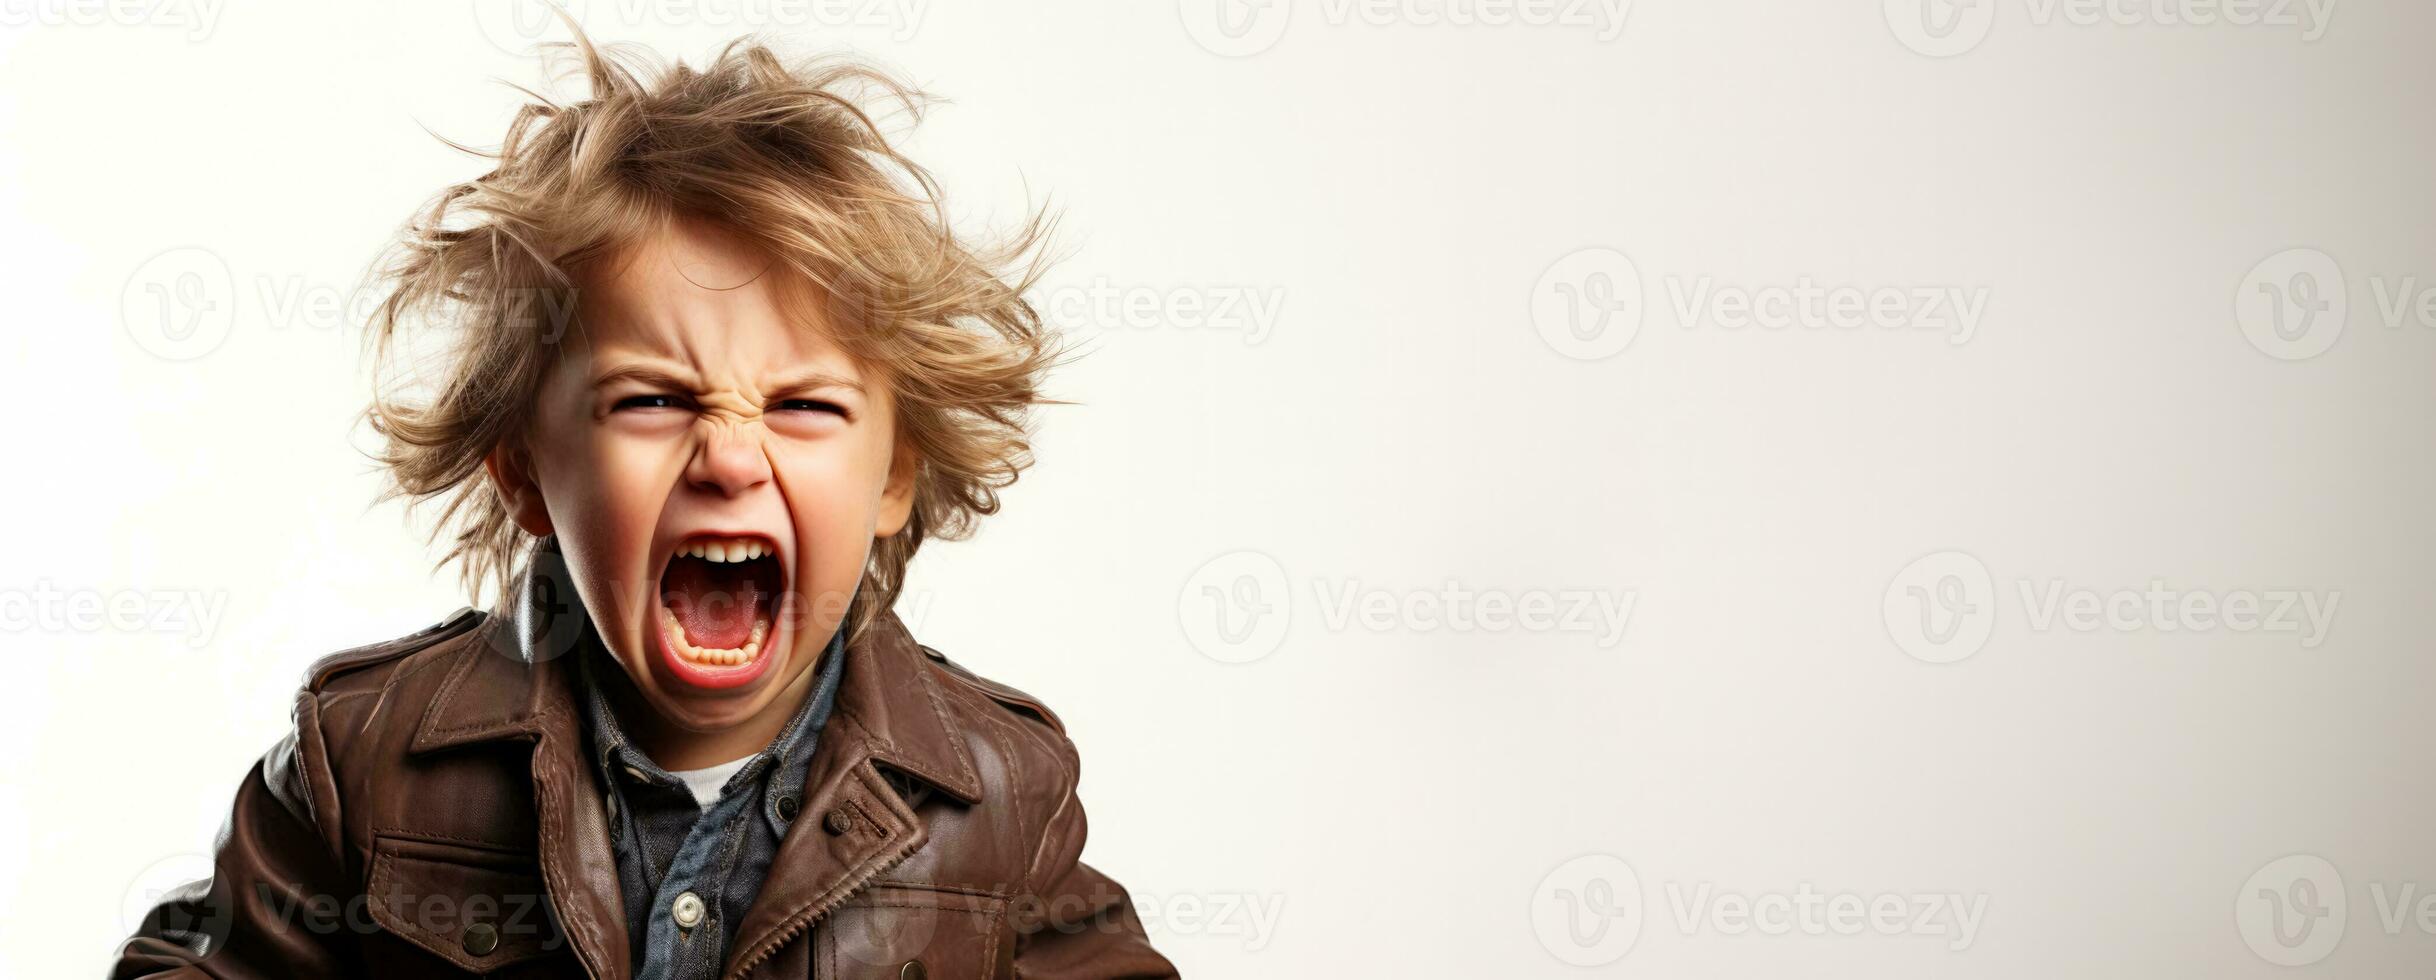 A single child screaming in frustration isolated on a white background photo